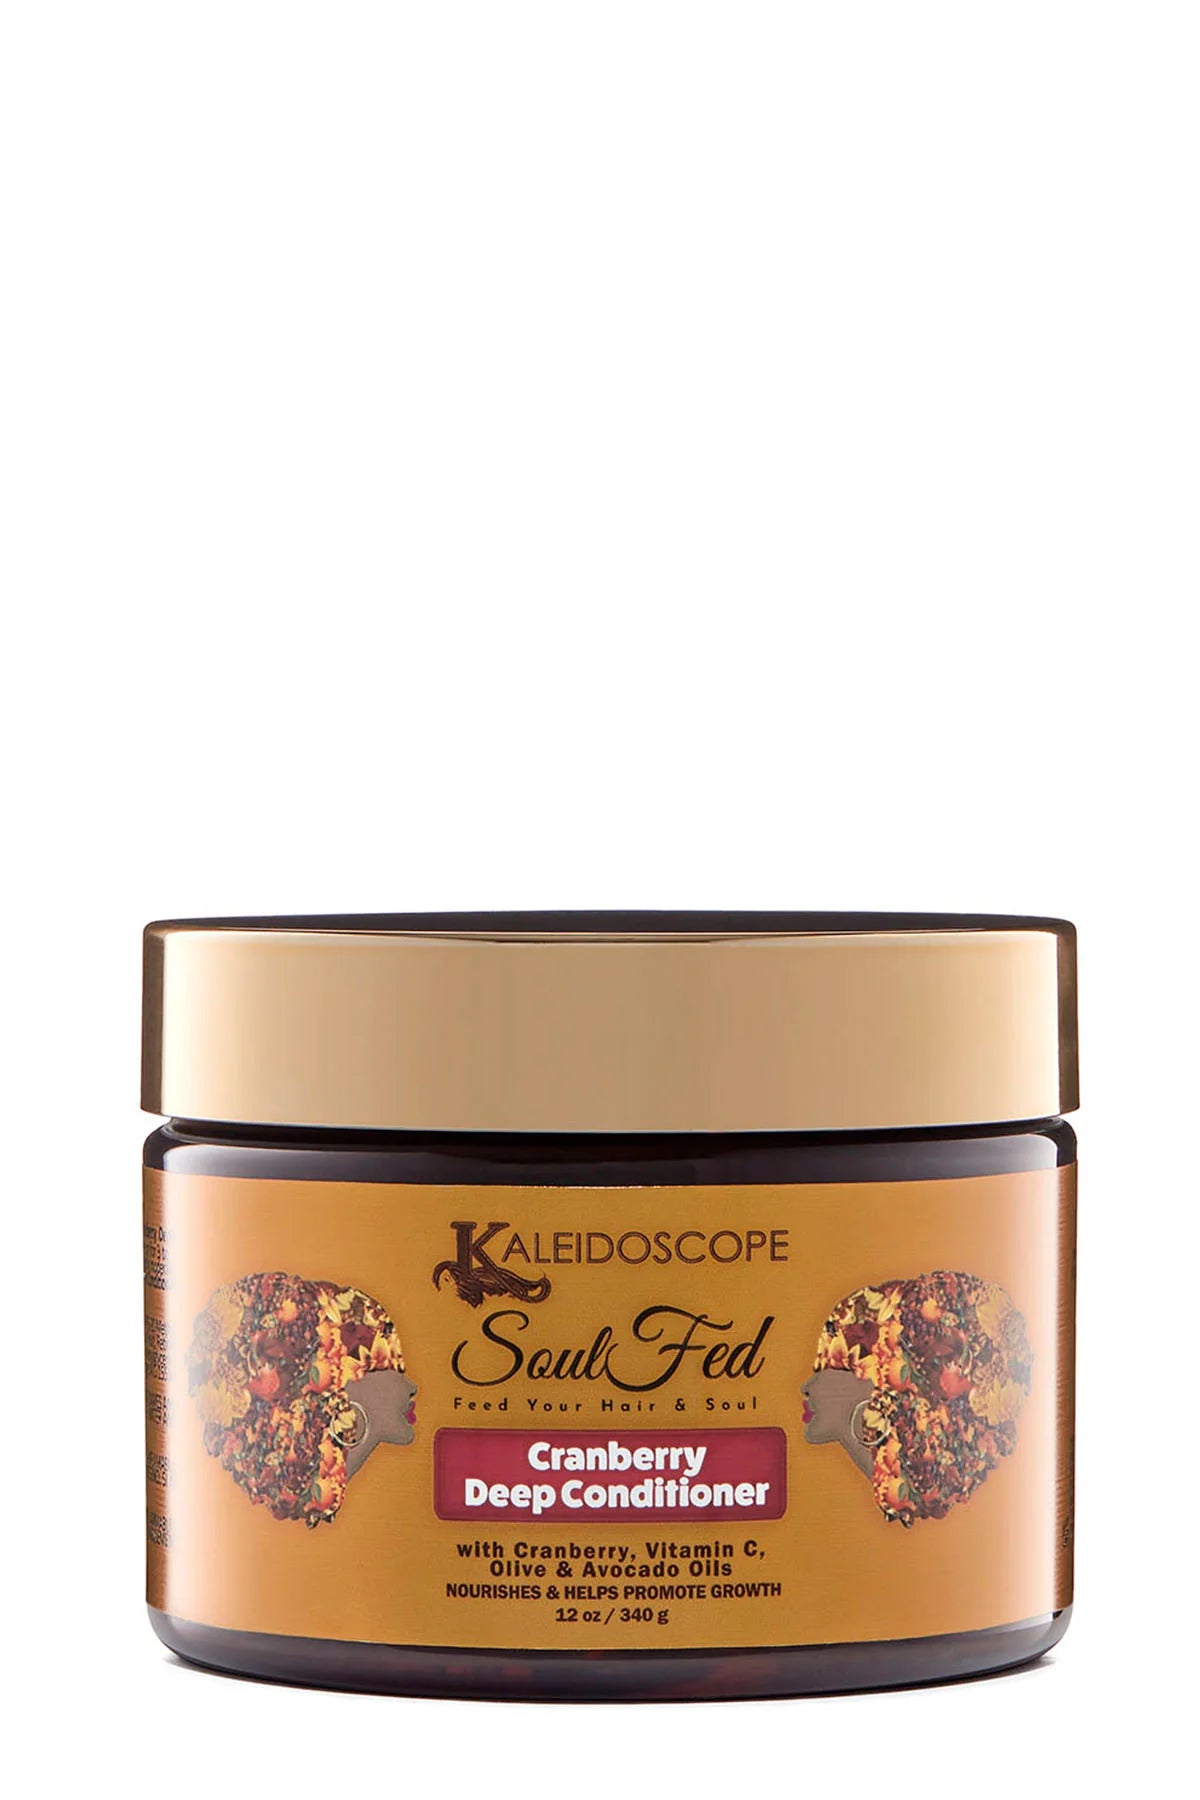 Kaleidoscope® SoulFed Cranberry Deep Conditioner